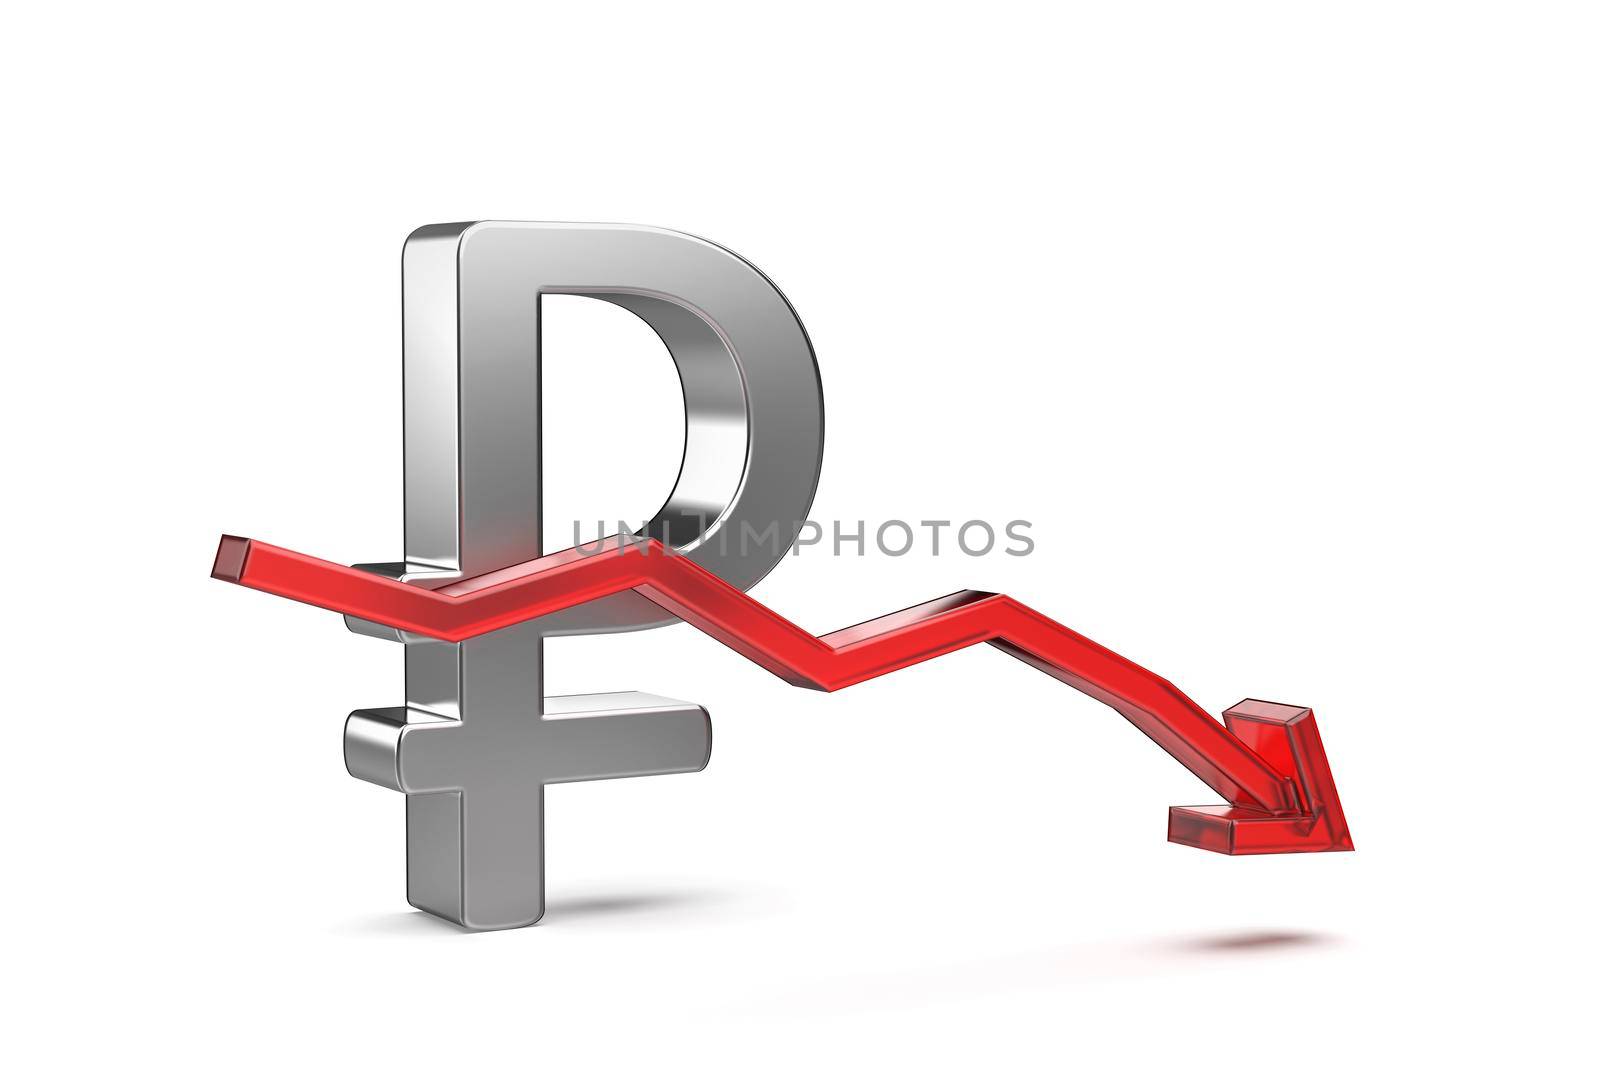 Russian ruble symbol with red arrow pointing down by magraphics